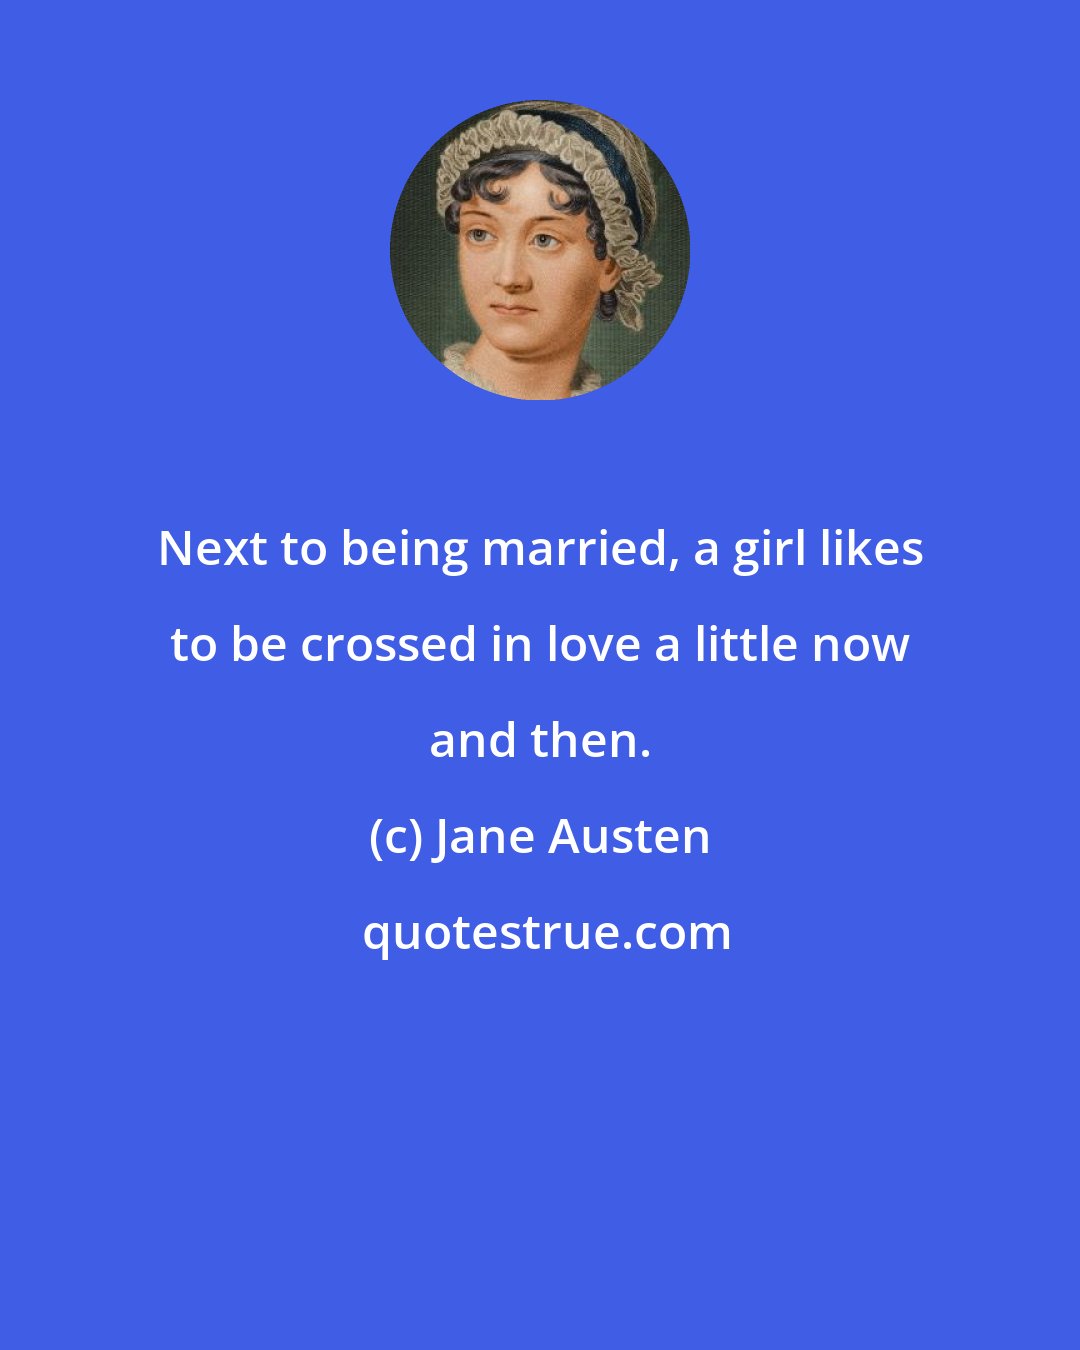 Jane Austen: Next to being married, a girl likes to be crossed in love a little now and then.